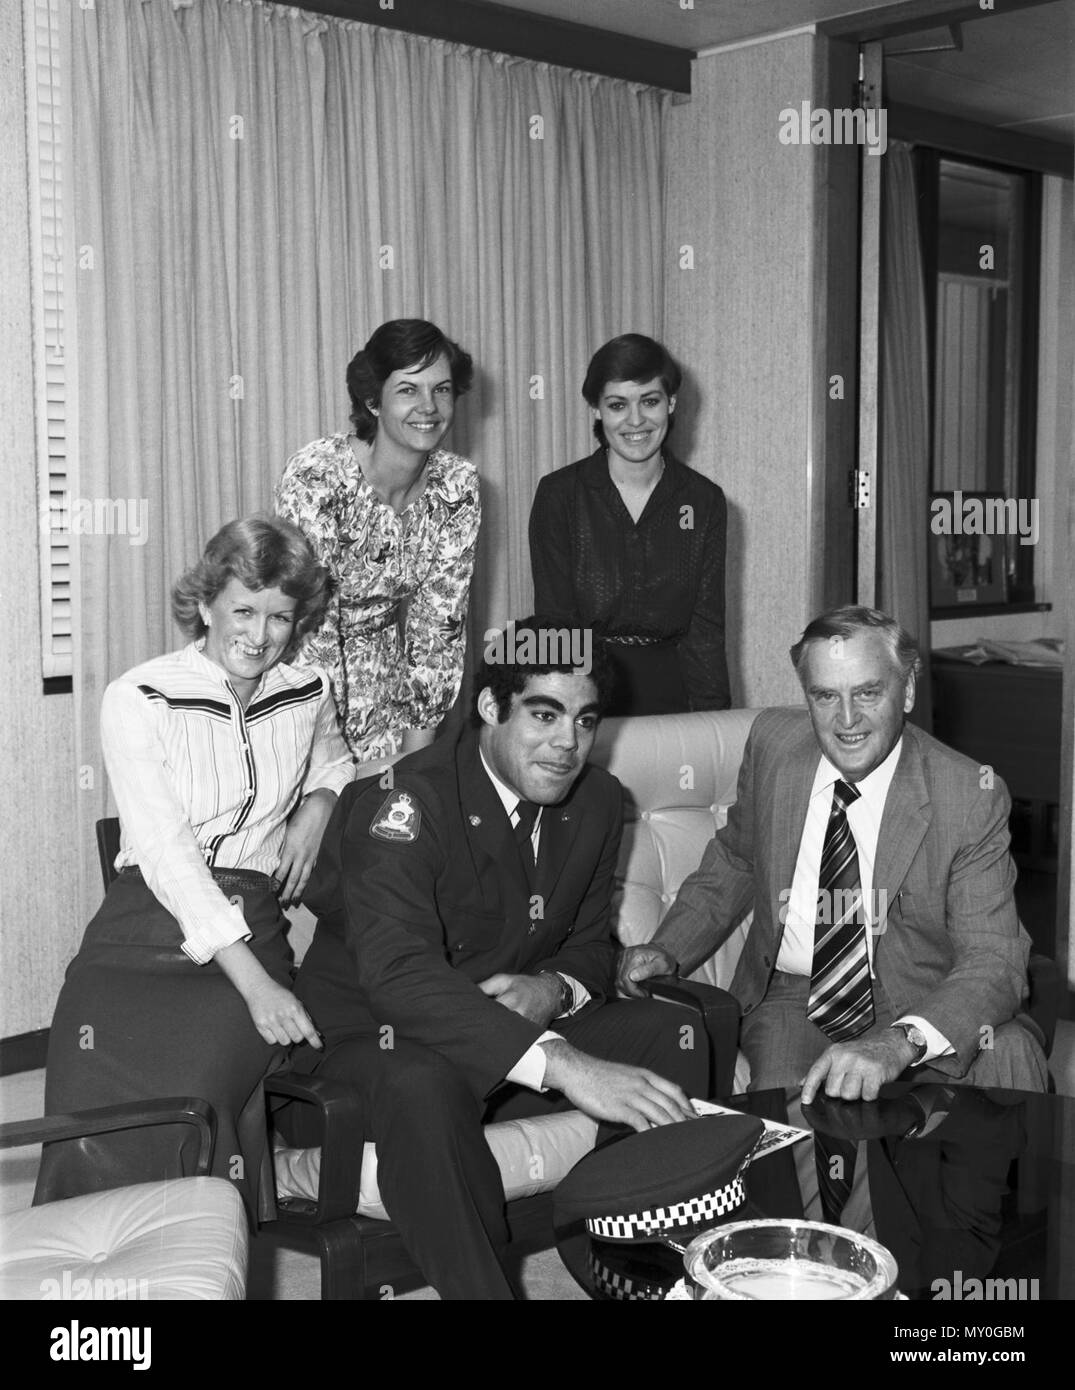 Visit to the office of Premier Joh Bjelke-Petersen by Constable. Before becoming a full-time professional footballer, Mal Meninga was a police officer. At one stage of his police career he was based at West End Police Station along with fellow Souths Magpies players Gary Grienke, Phil Veivers, Gary Belcher and Peter Jackson. Stock Photo